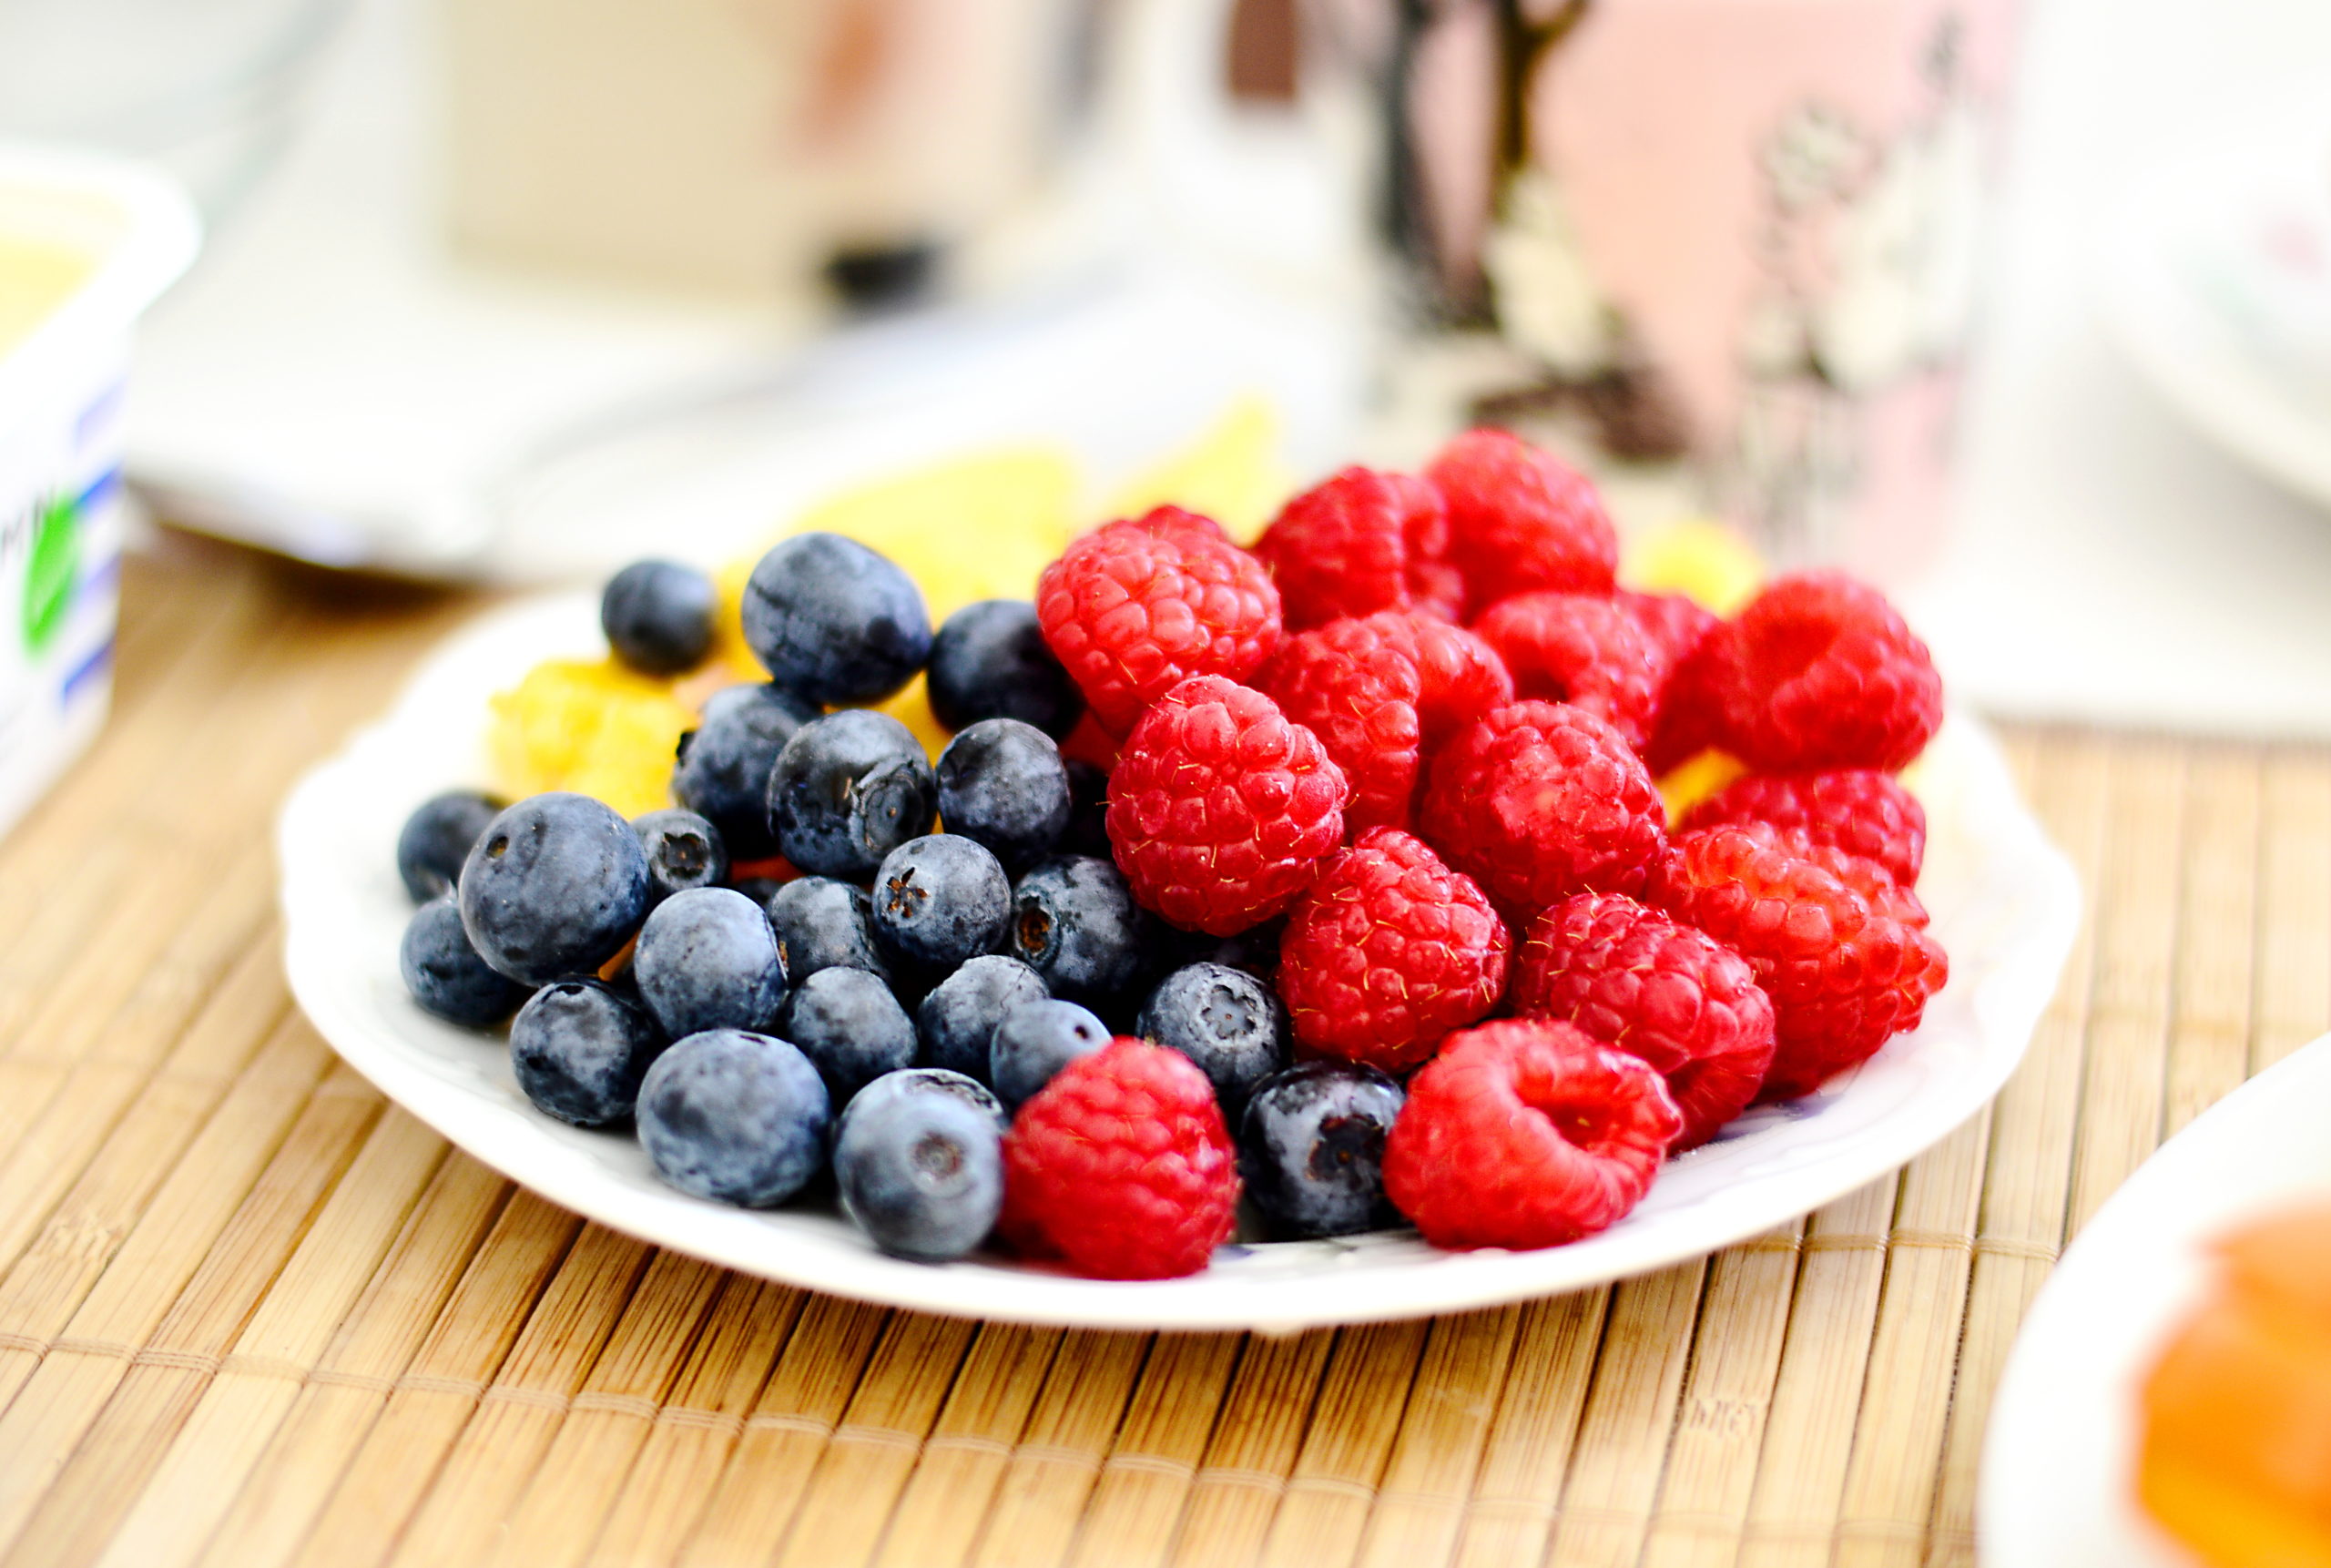 plate of blueberries and raspberries high in flavonols